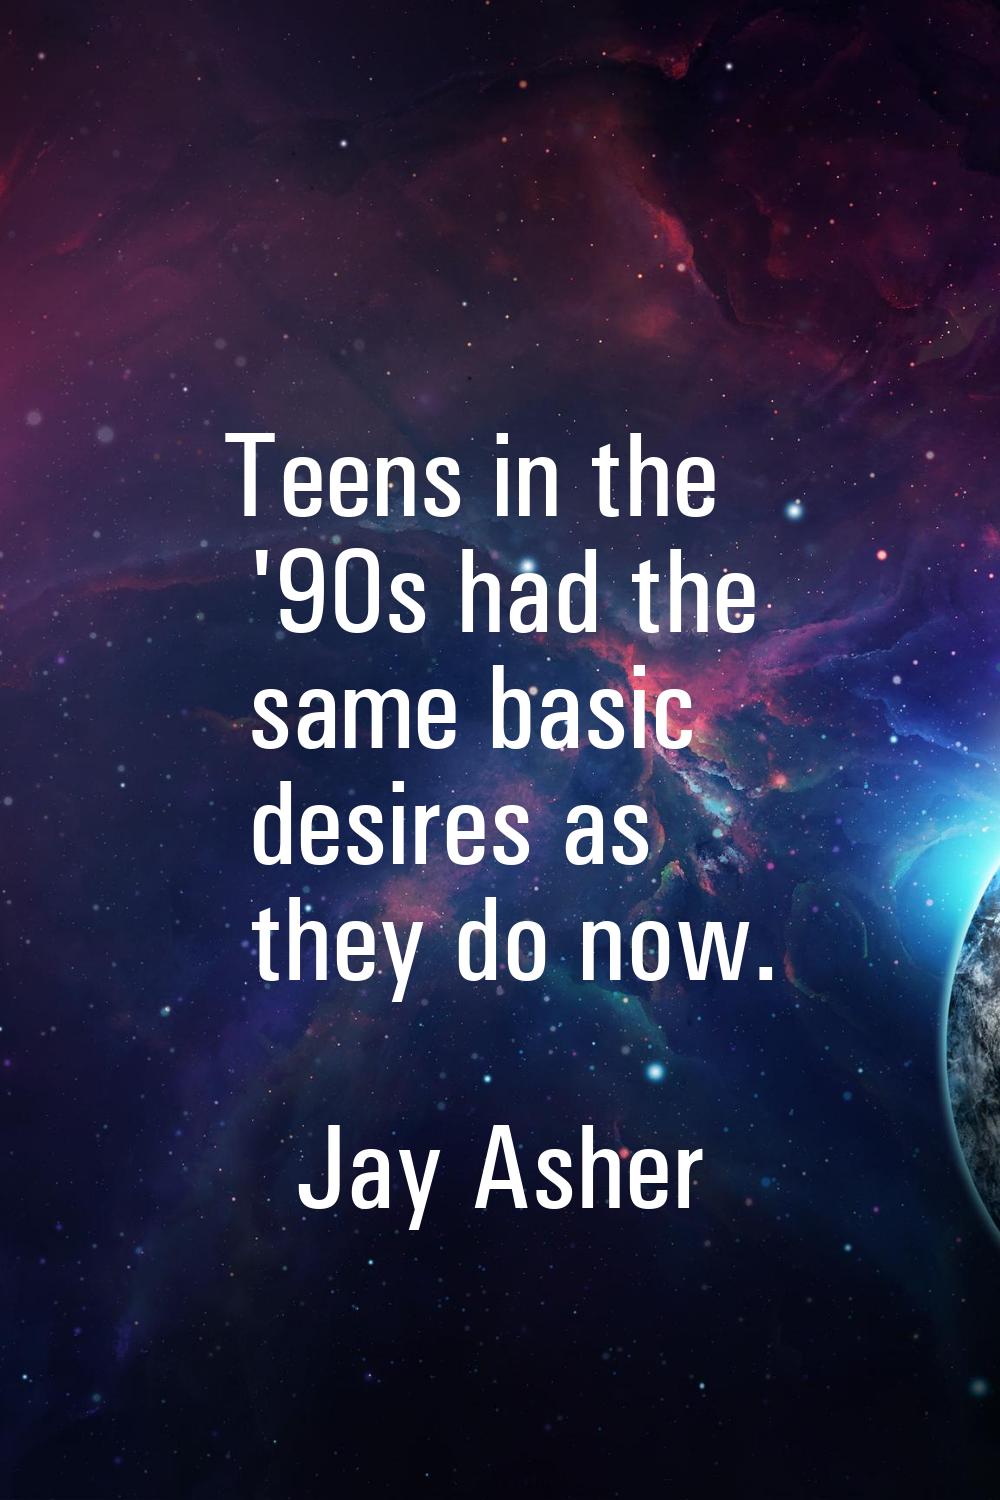 Teens in the '90s had the same basic desires as they do now.